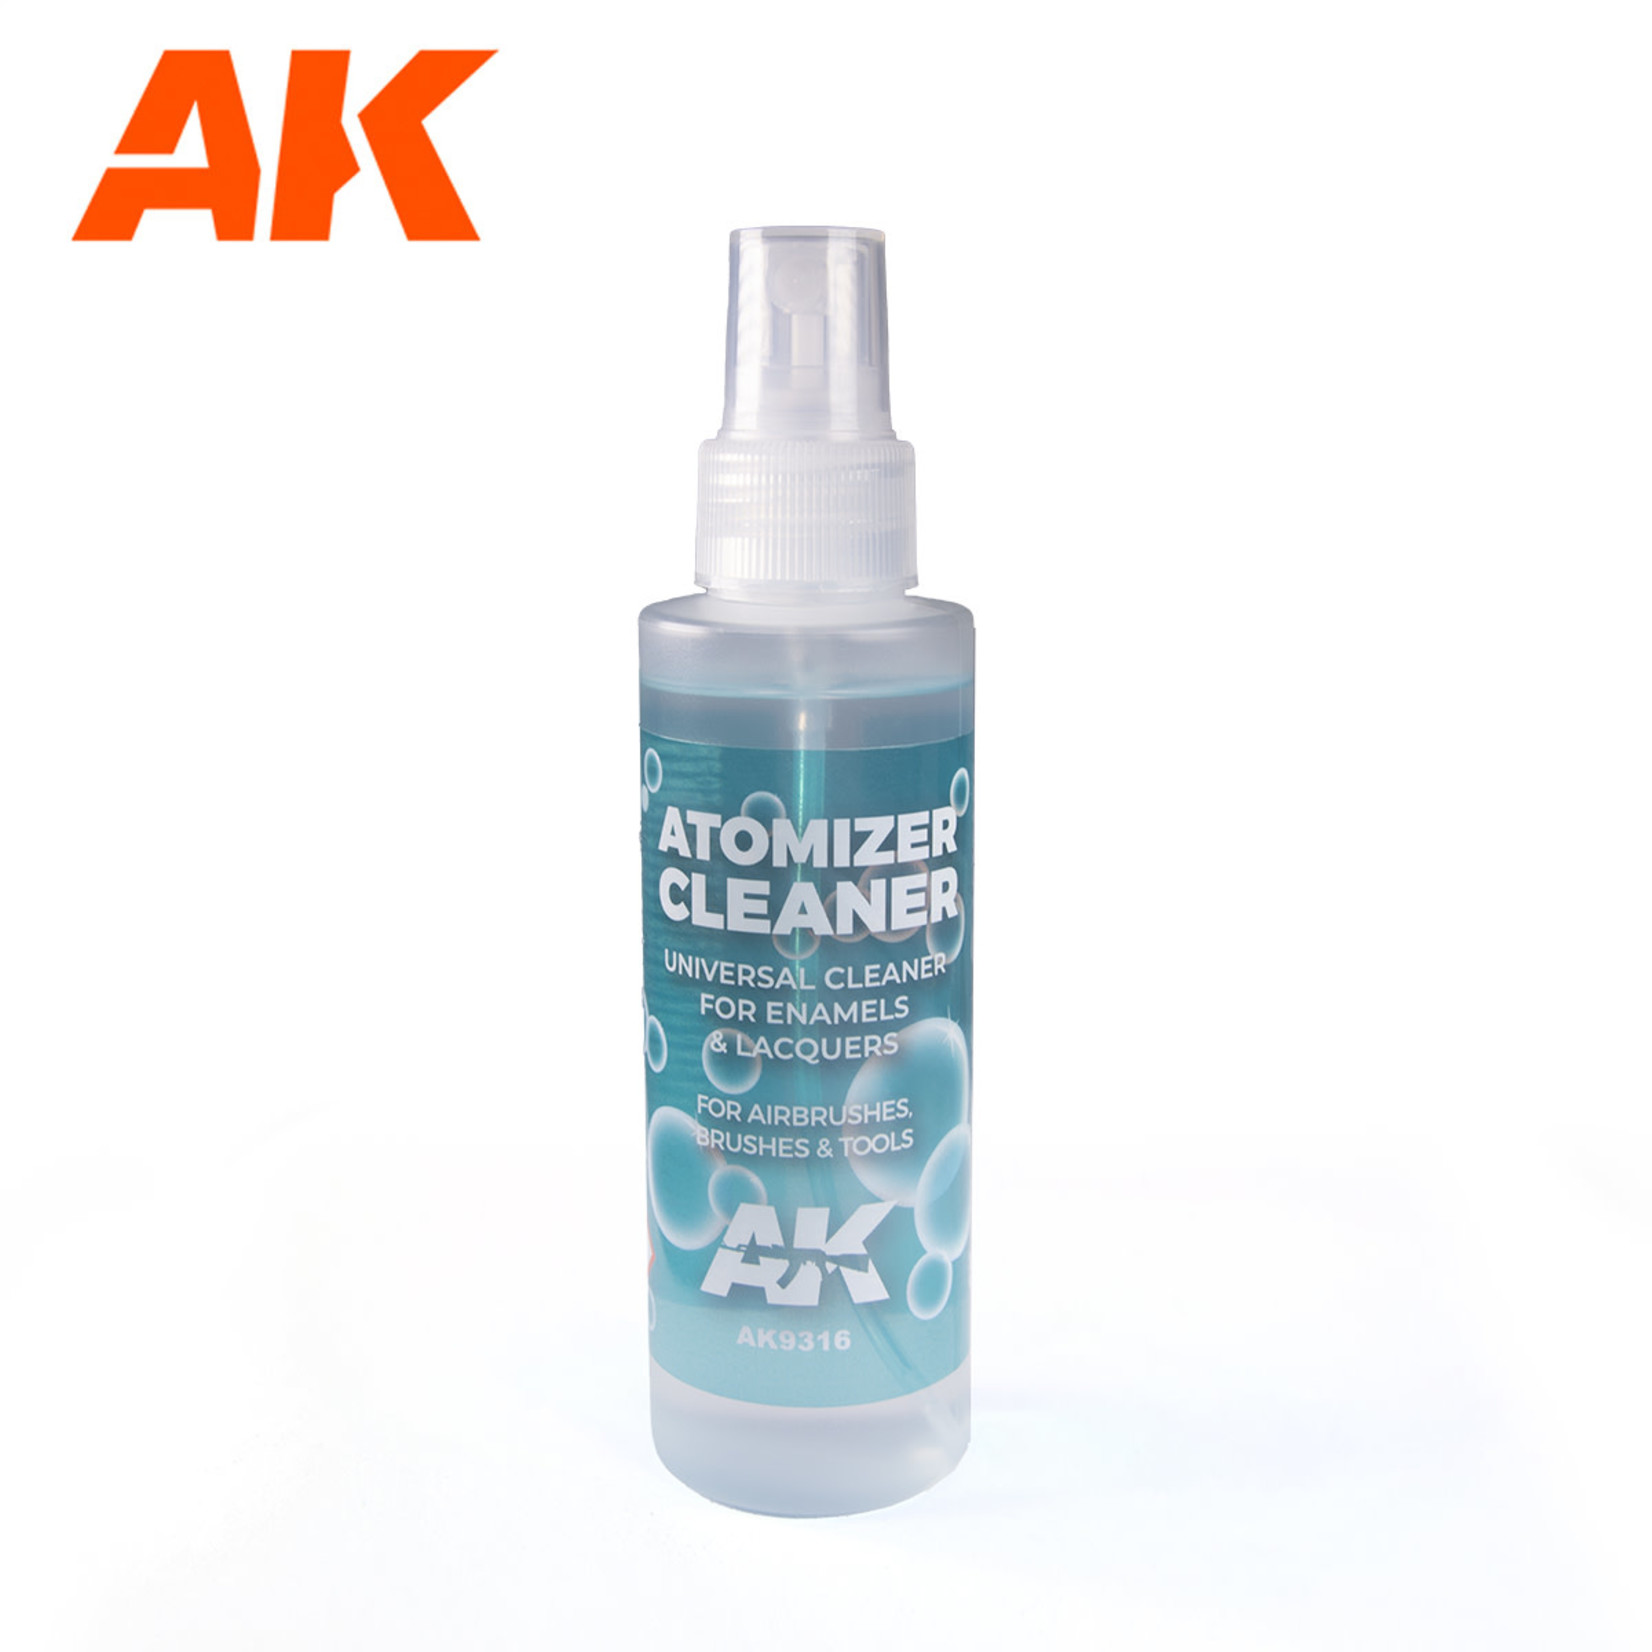 AK Interactive AK9316 Atomizer Cleaner for Enamels & Lacquers 125ml